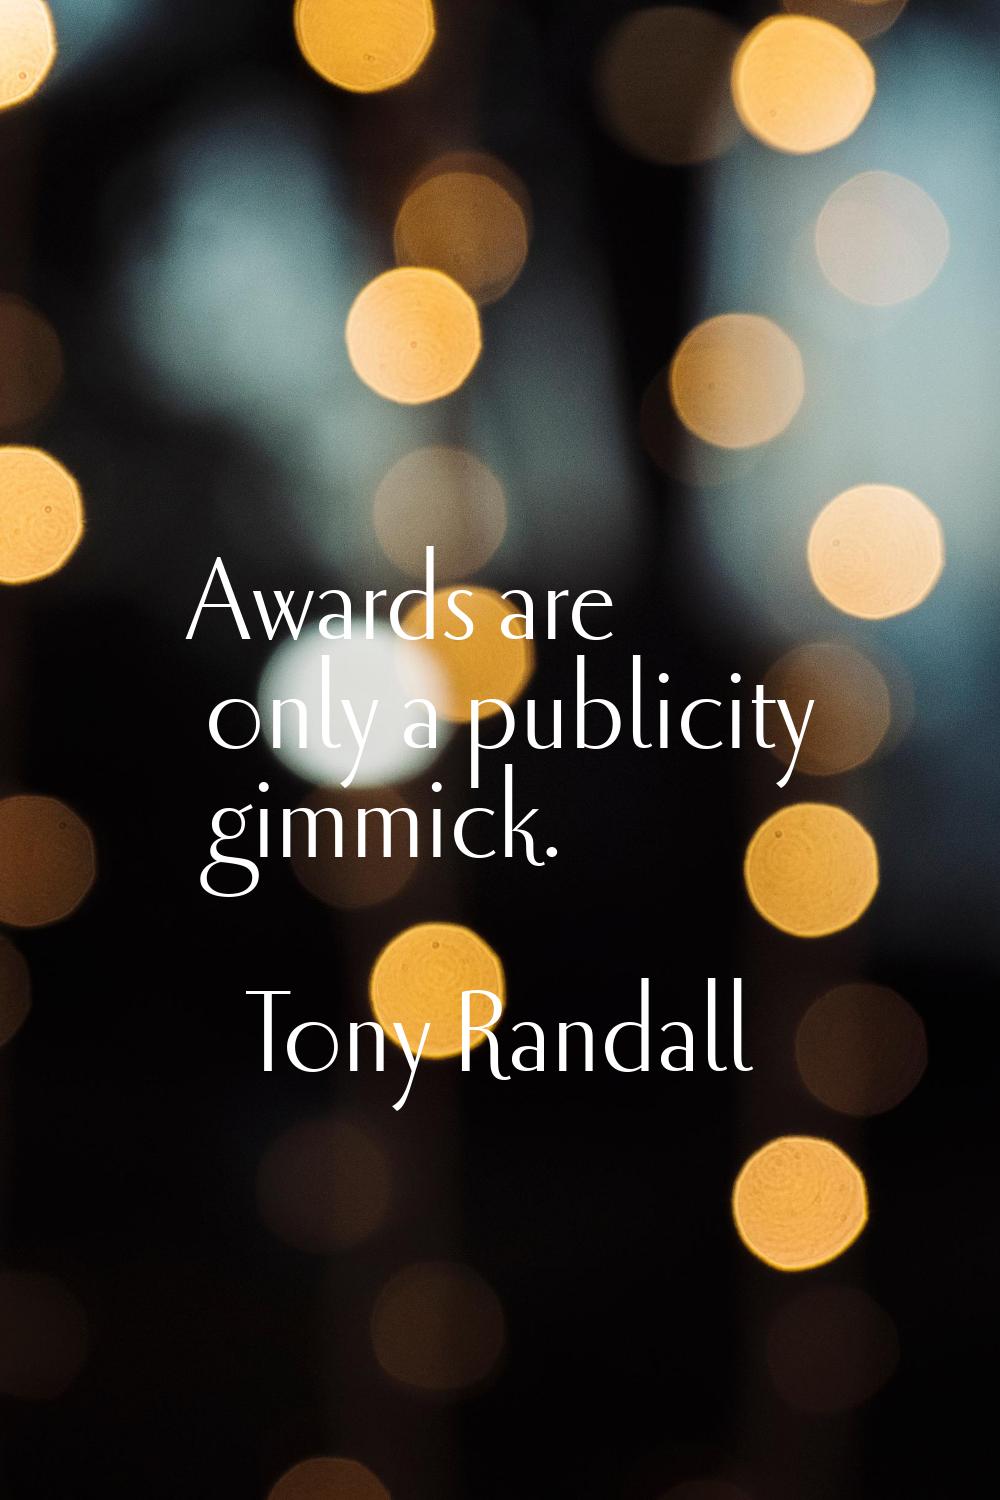 Awards are only a publicity gimmick.